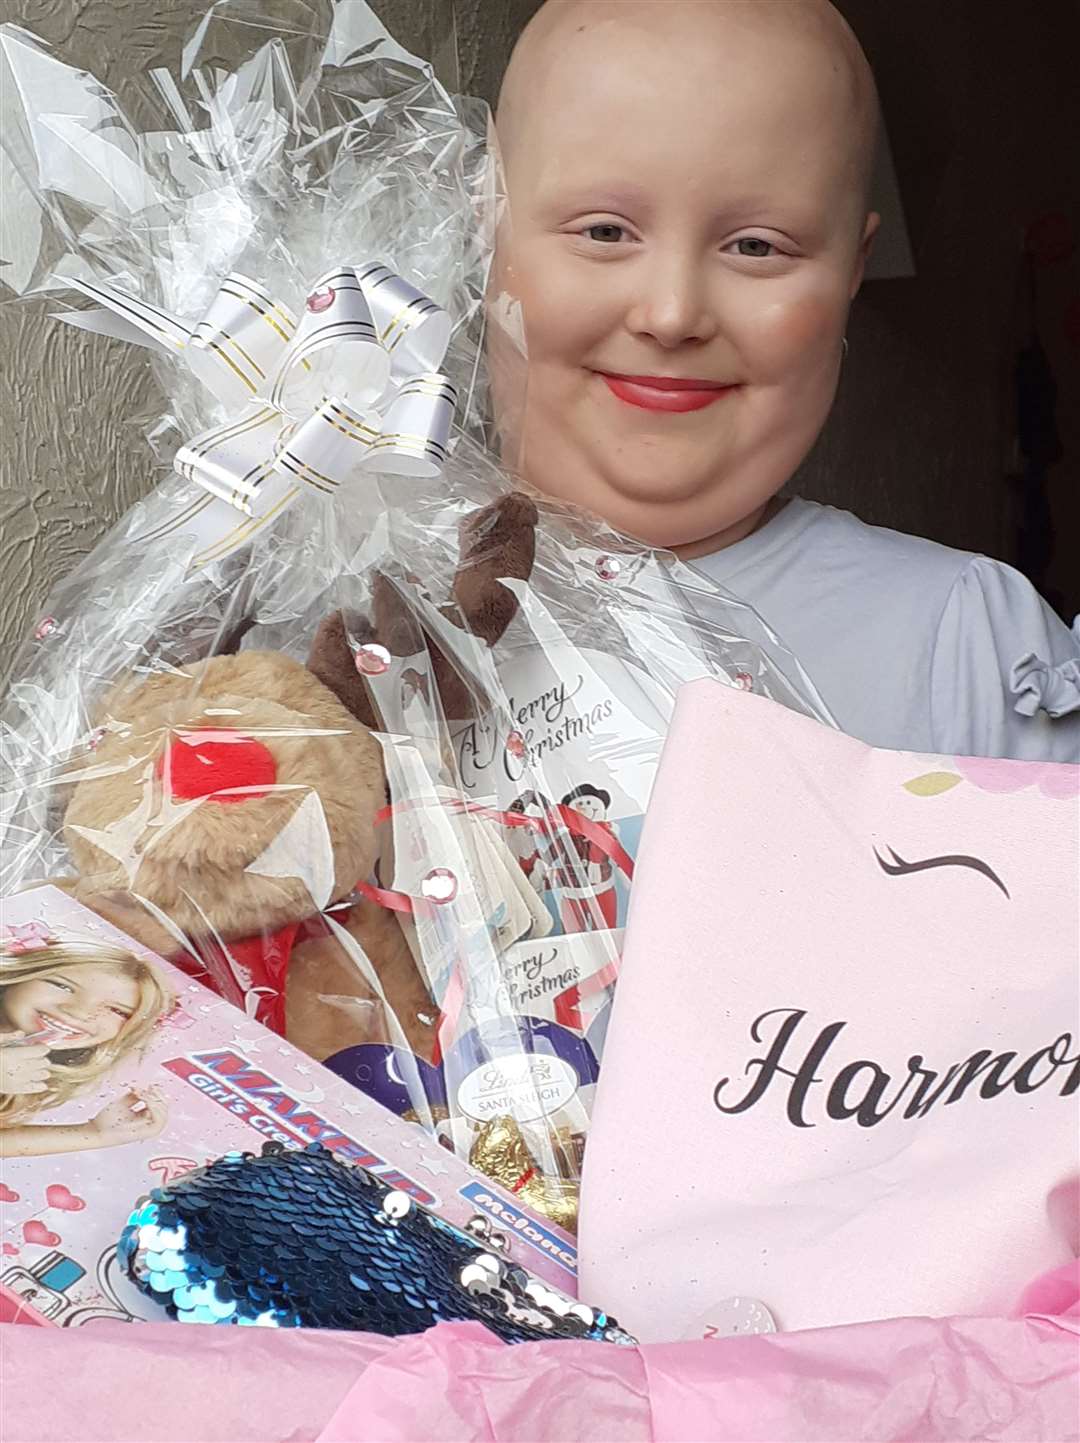 Harmony Morgan-Young who is undergoing treatment for bone cancer recieved a personalised hamper